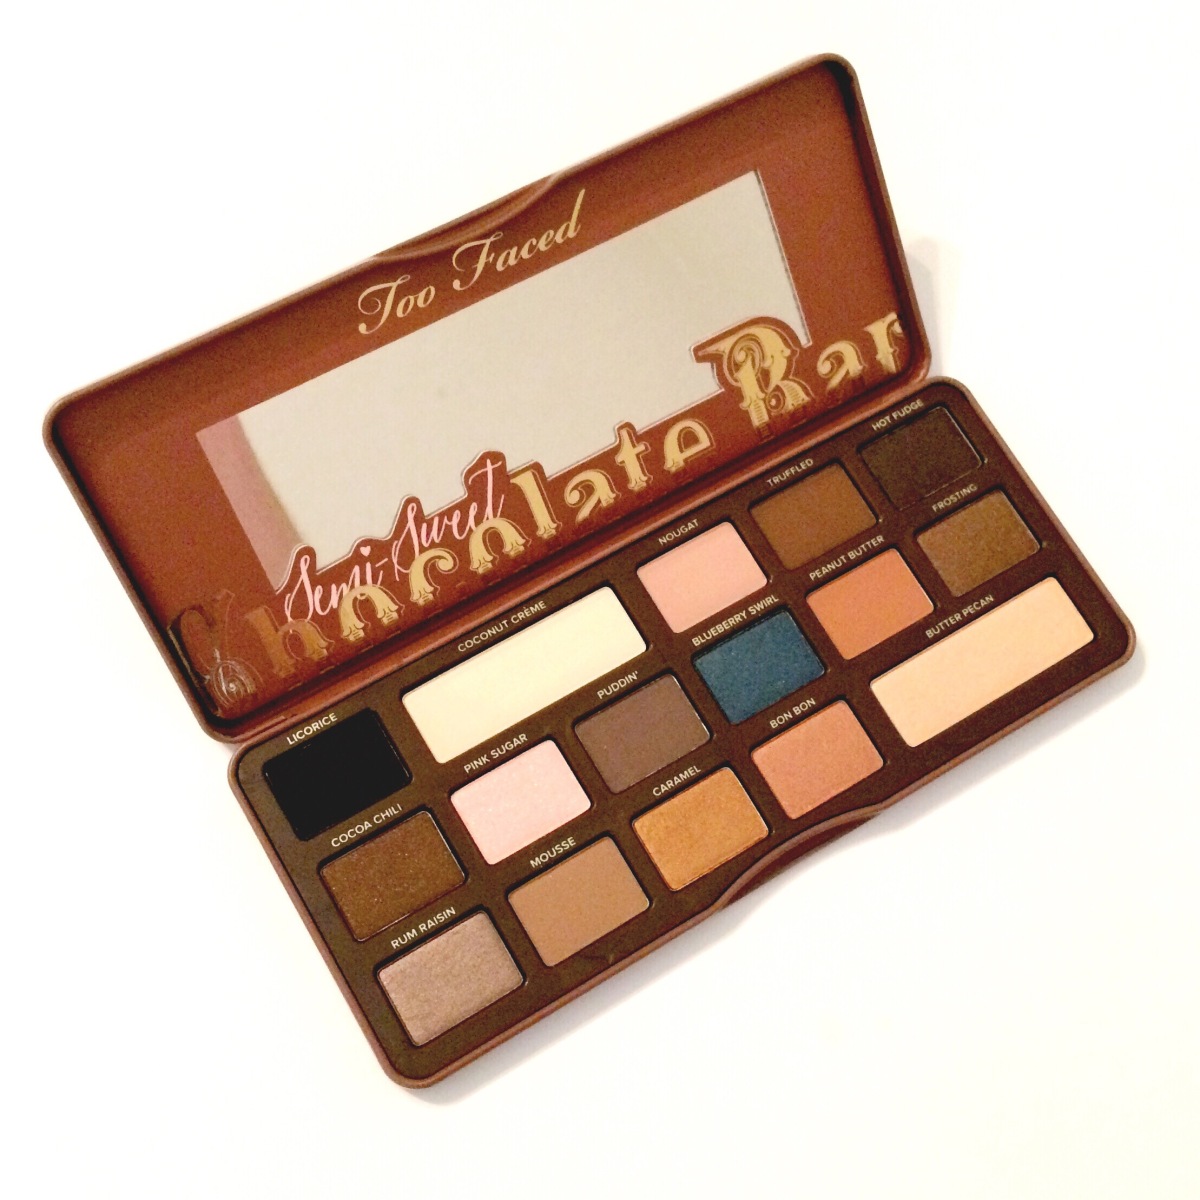 Too Faced SEMI-SWEET Chocolate Bar Palette Review + Swatches